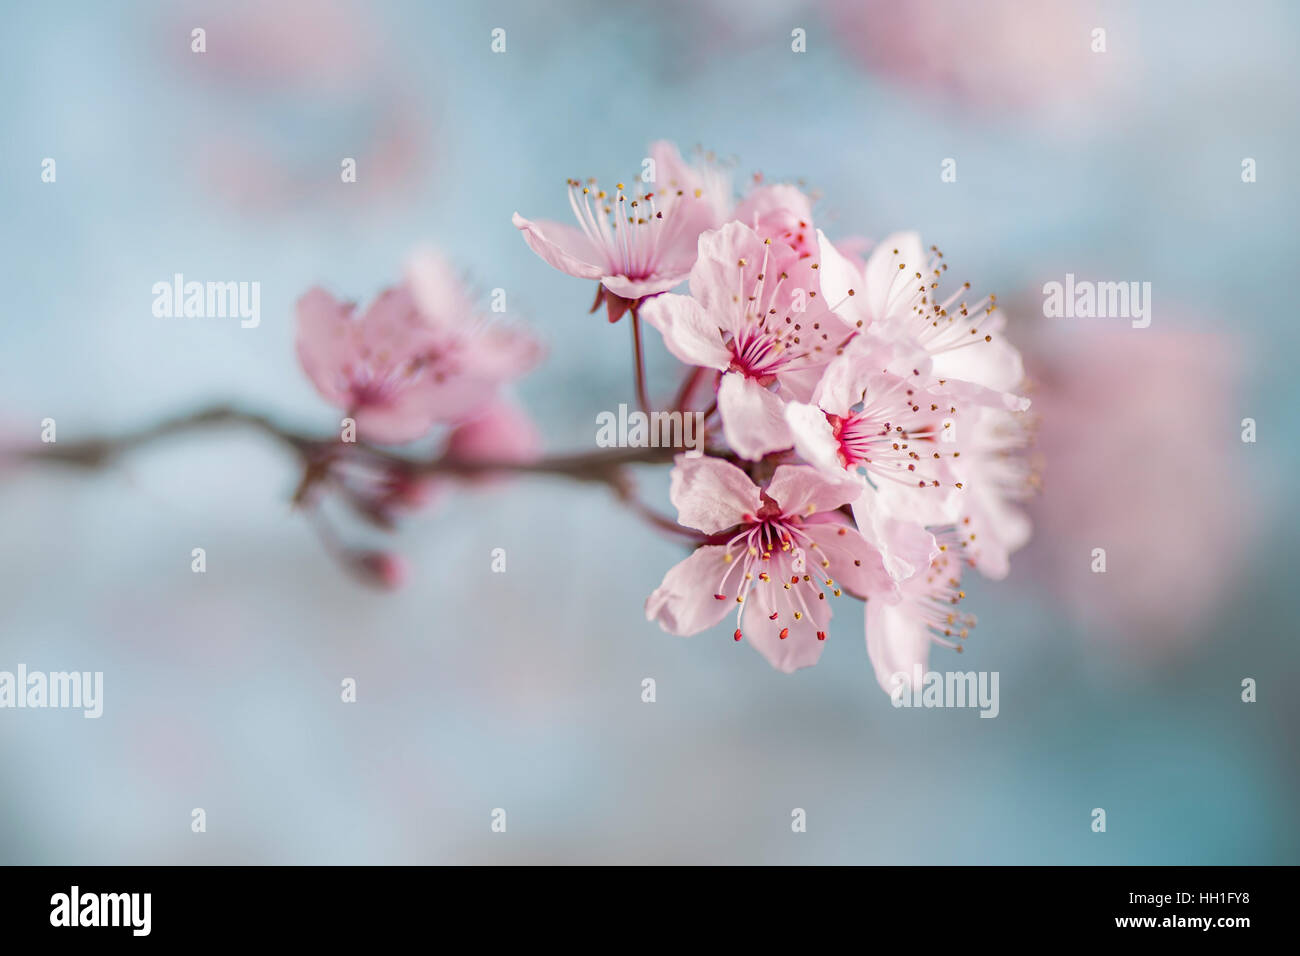 The beautiful pink spring blossom of the Black Cherry Plum Tree also known as Prunus Cerasifera Nigra, taken against a blue sky and soft background Stock Photo